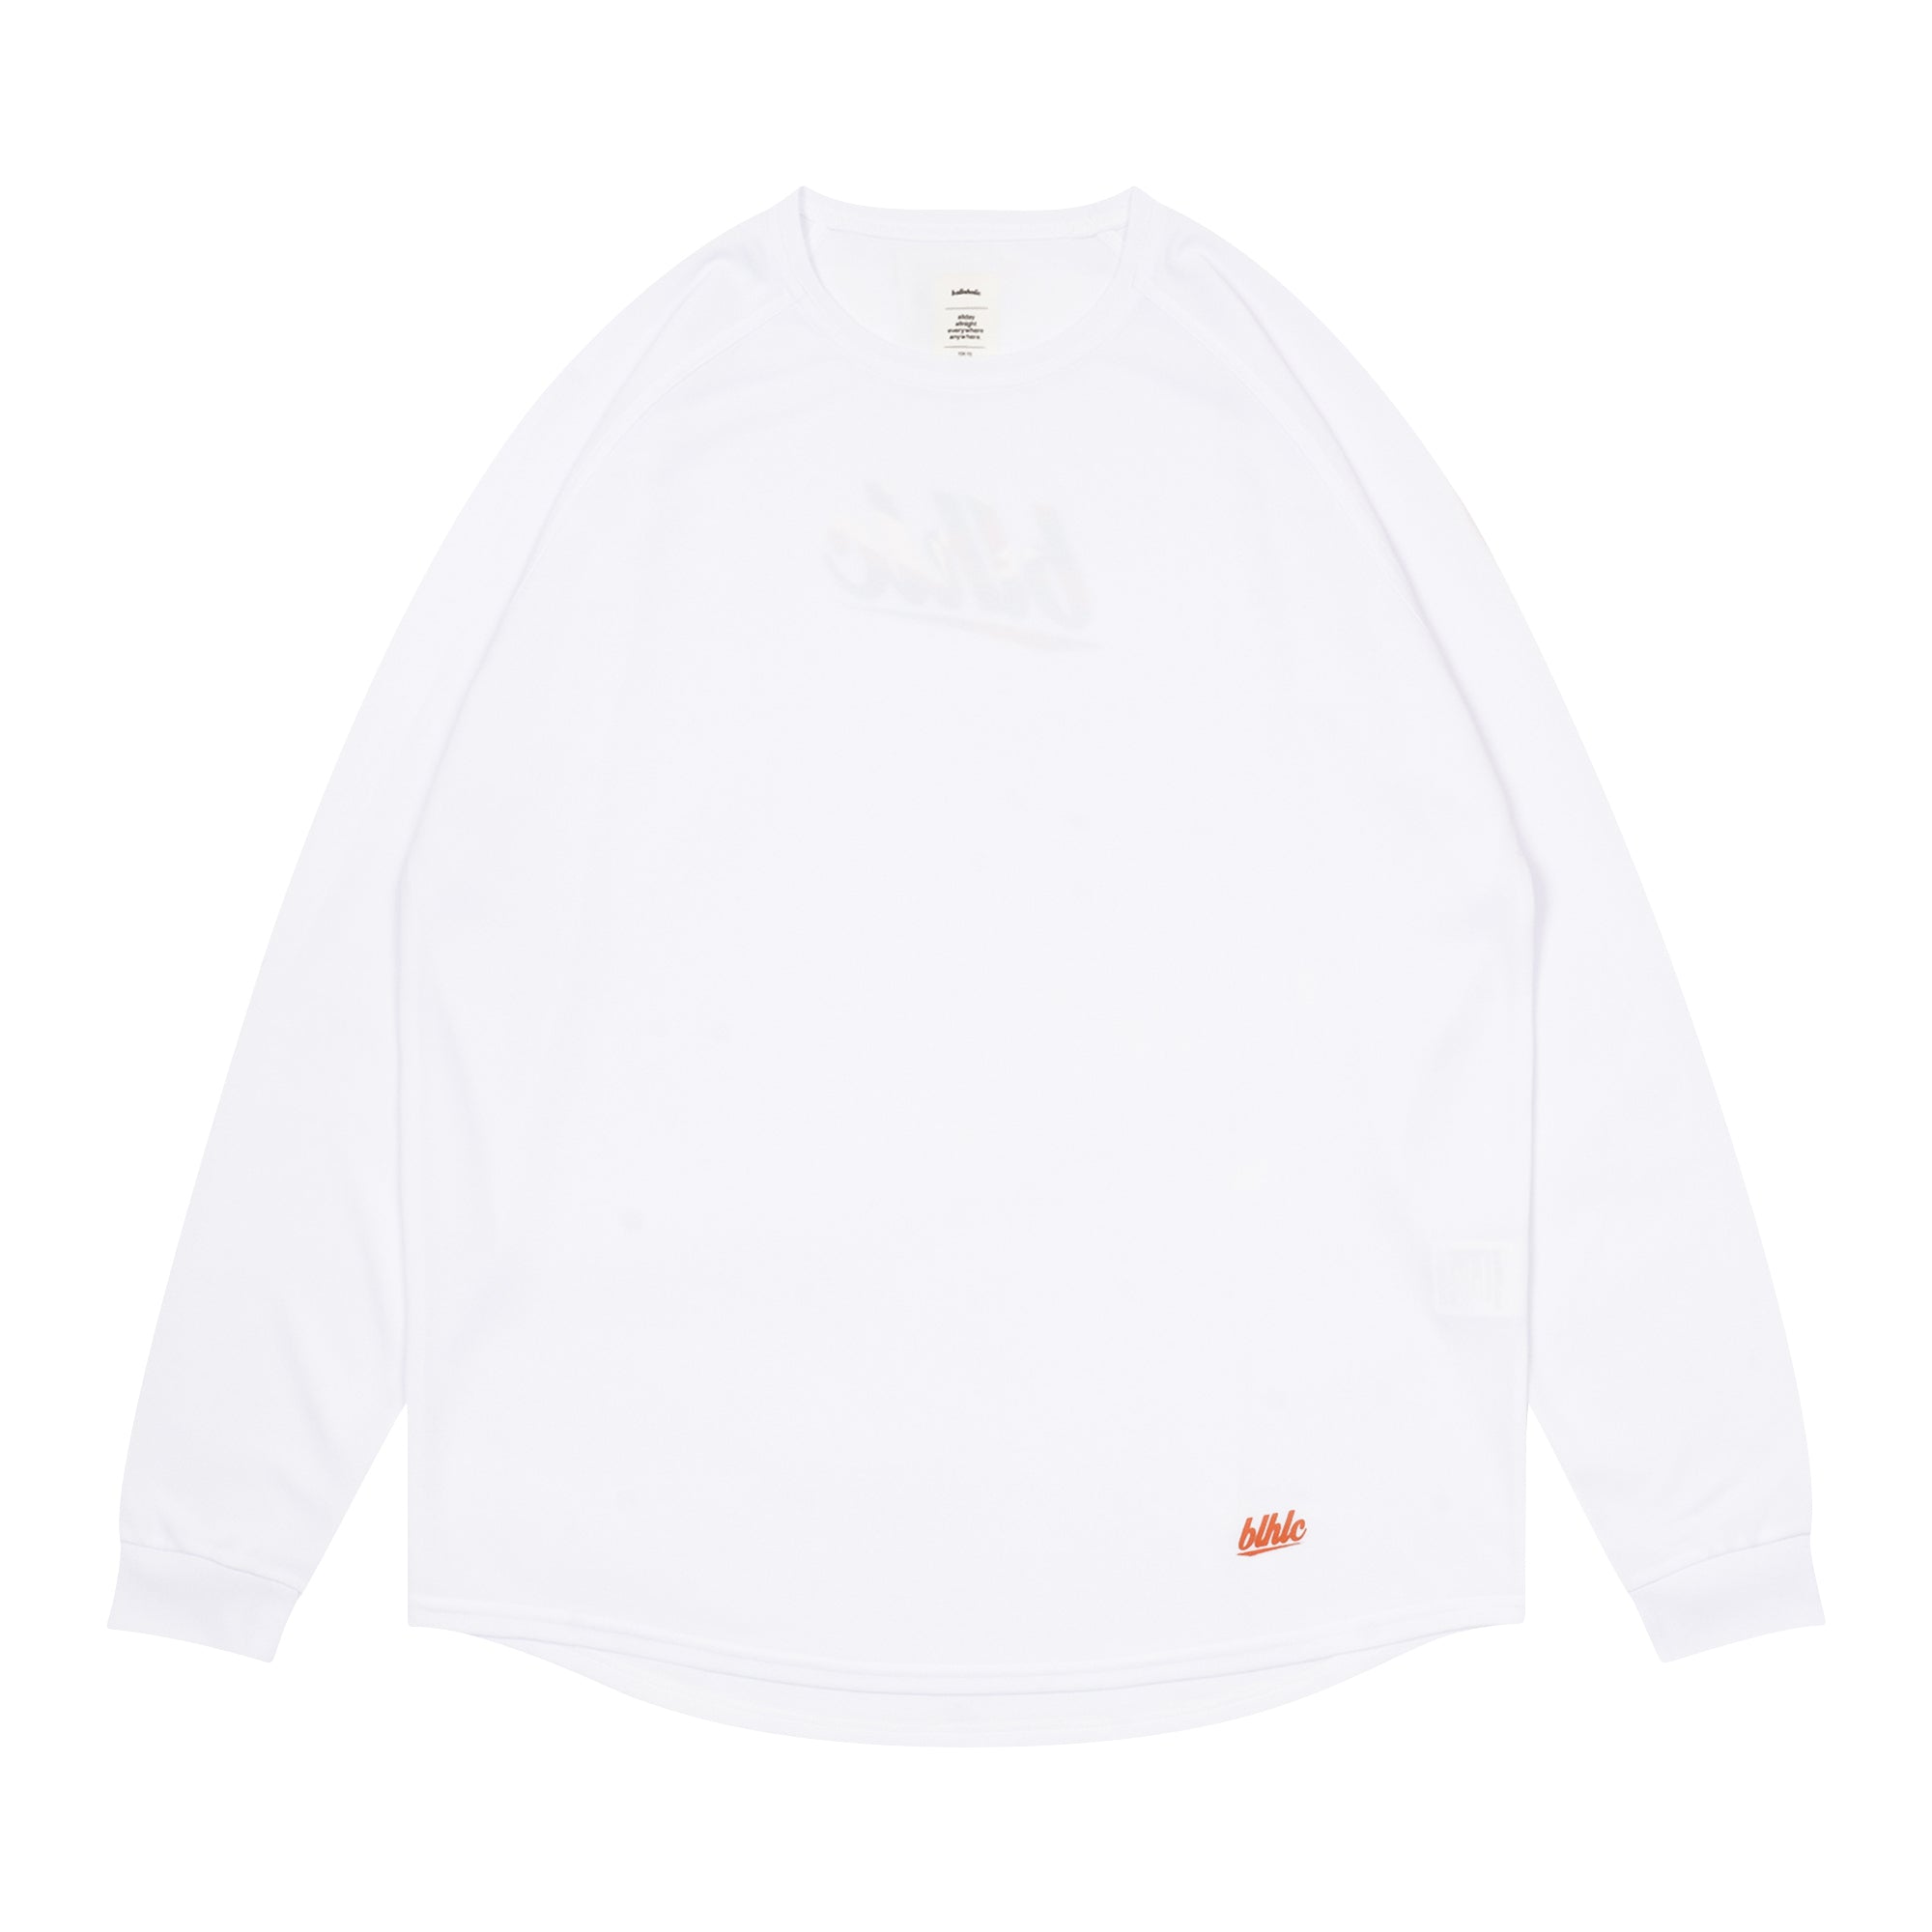 blhlc Back Print Cool Long Tee (white/east)